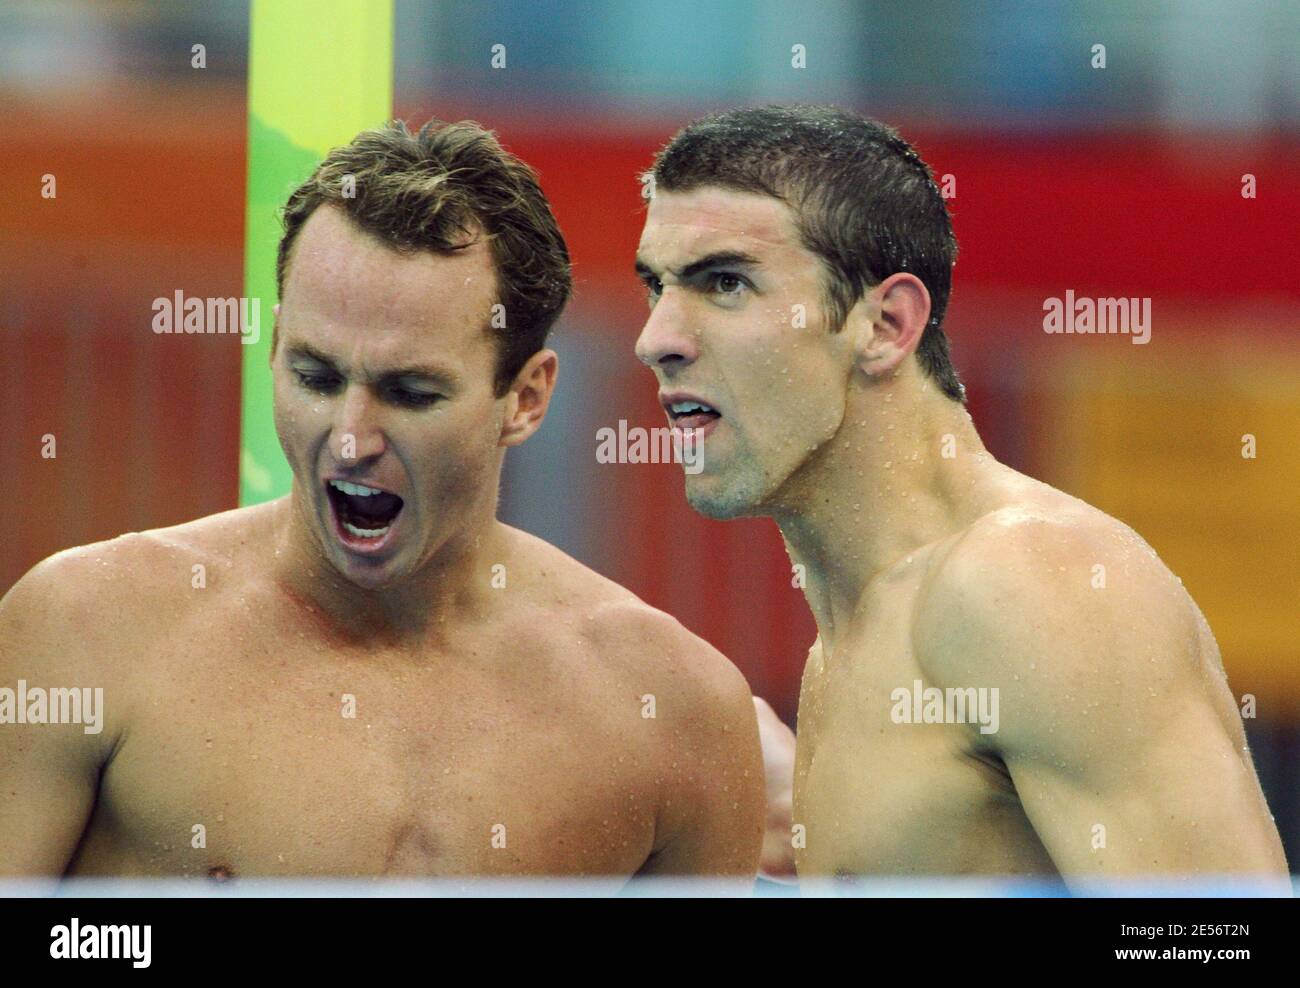 (R-L) Michael Phelps and Aaron Piersol of the United States celebrate after winning gold medals in the Men's 4x100 Medley Relay at the XXIX Beijing Olympic Games Day 9 at the National Aquatic Center in Beijing, China on August 17, 2008. Photo by Gouhier-Hahn-Nebinger/Cameleon/ABACAPRESS.COM Stock Photo